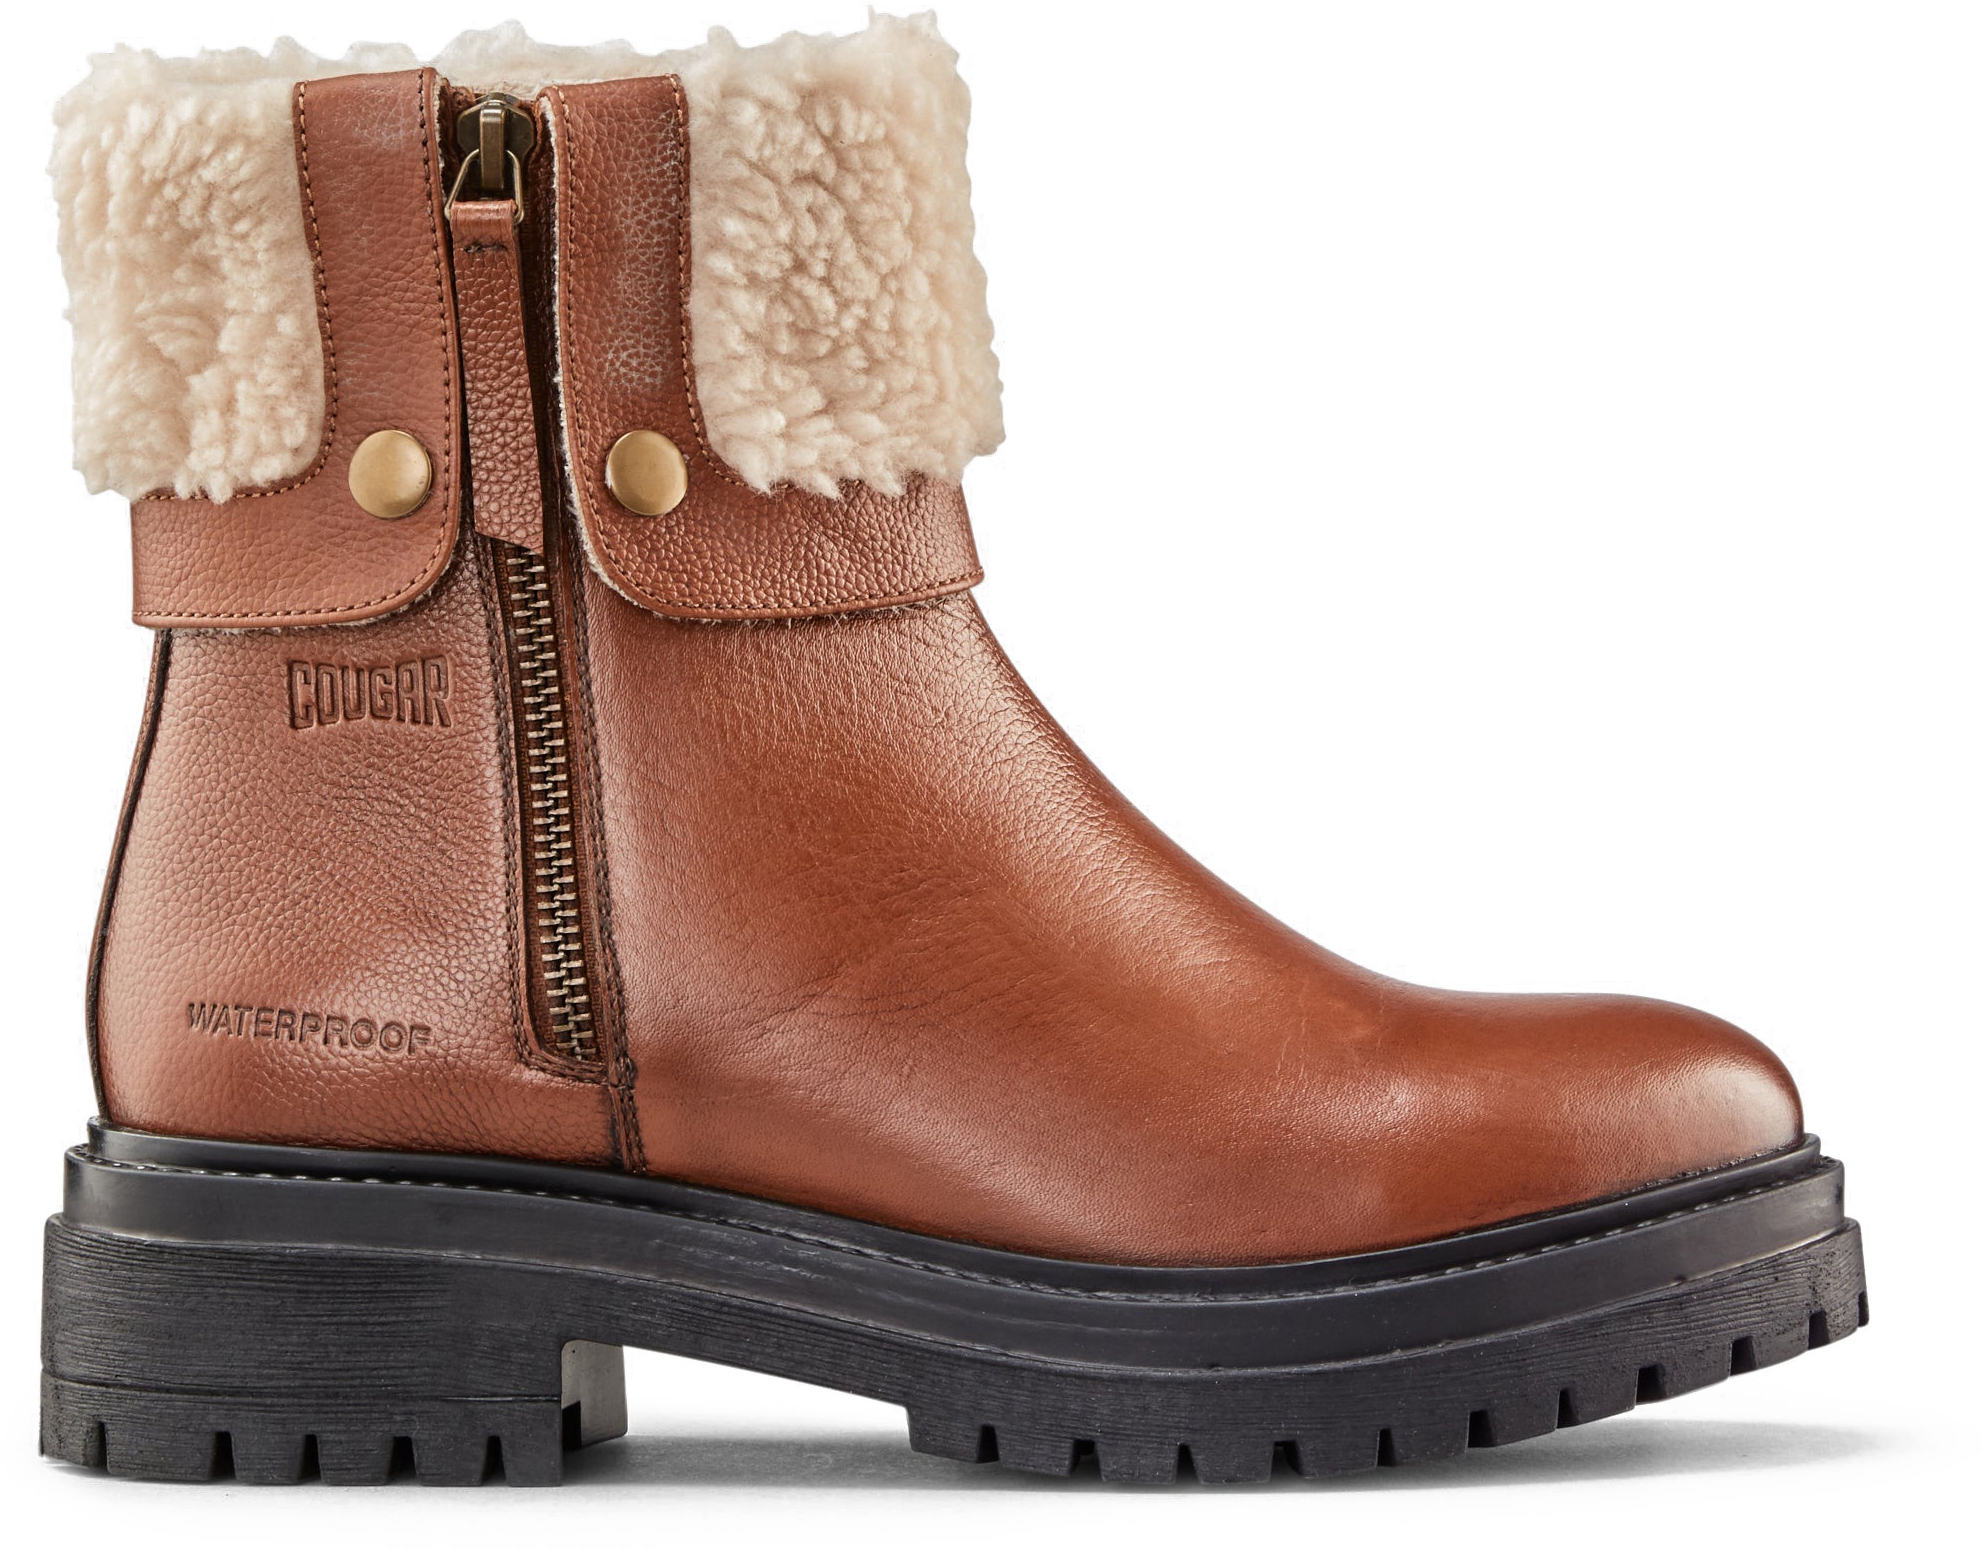 Cougar Vigo Leather Waterproof Winter Boots Women's Up to 43% Off w/ Free Shipping Handling